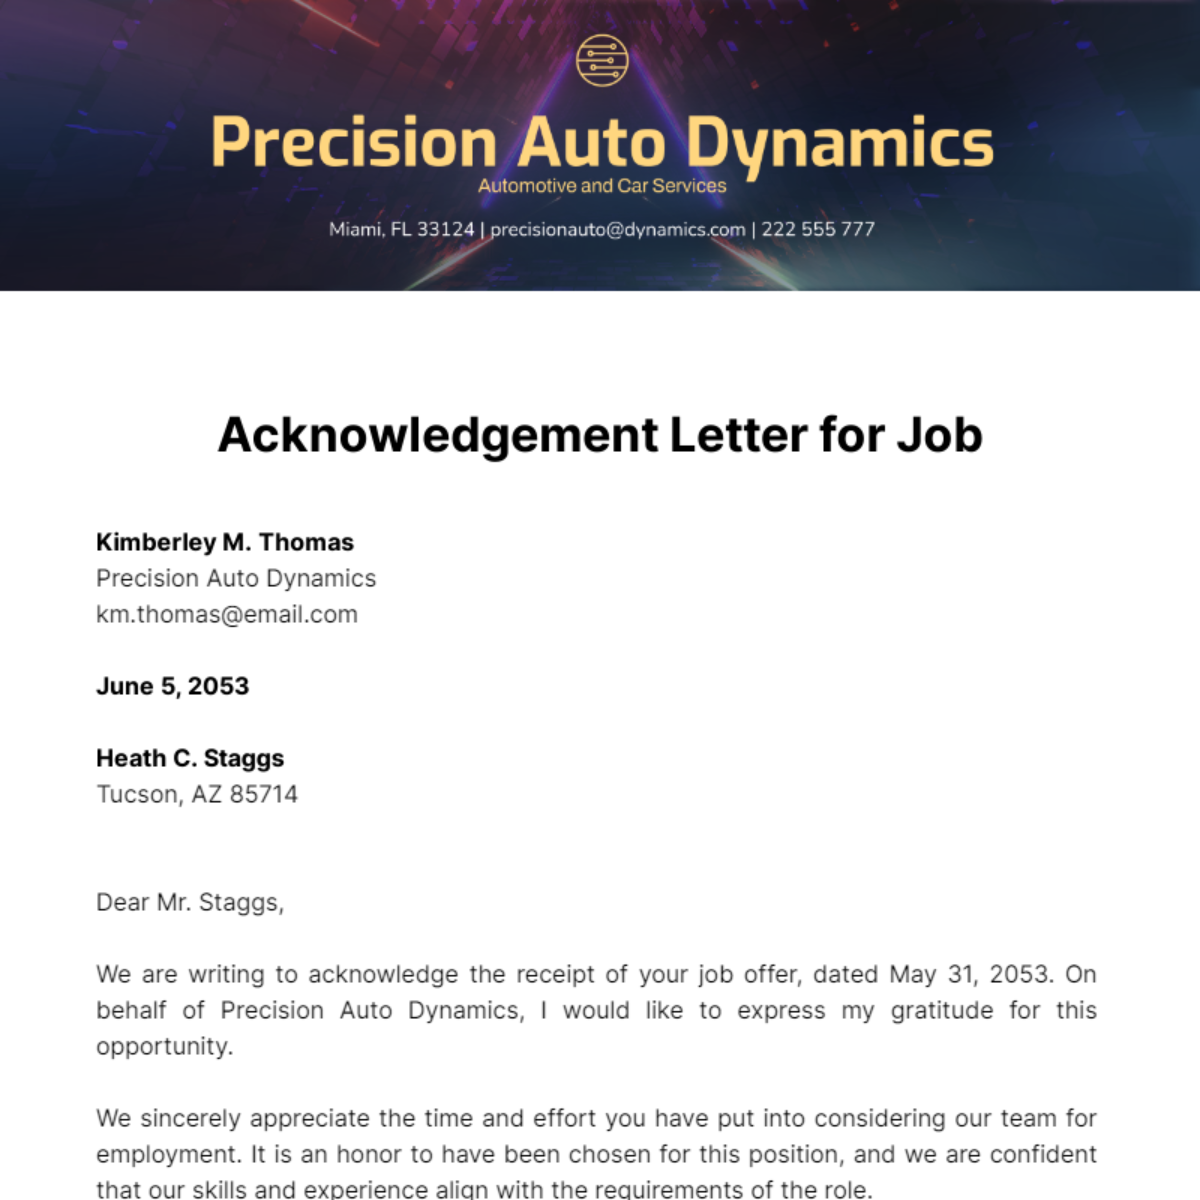 Acknowledgement Letter for Job Template